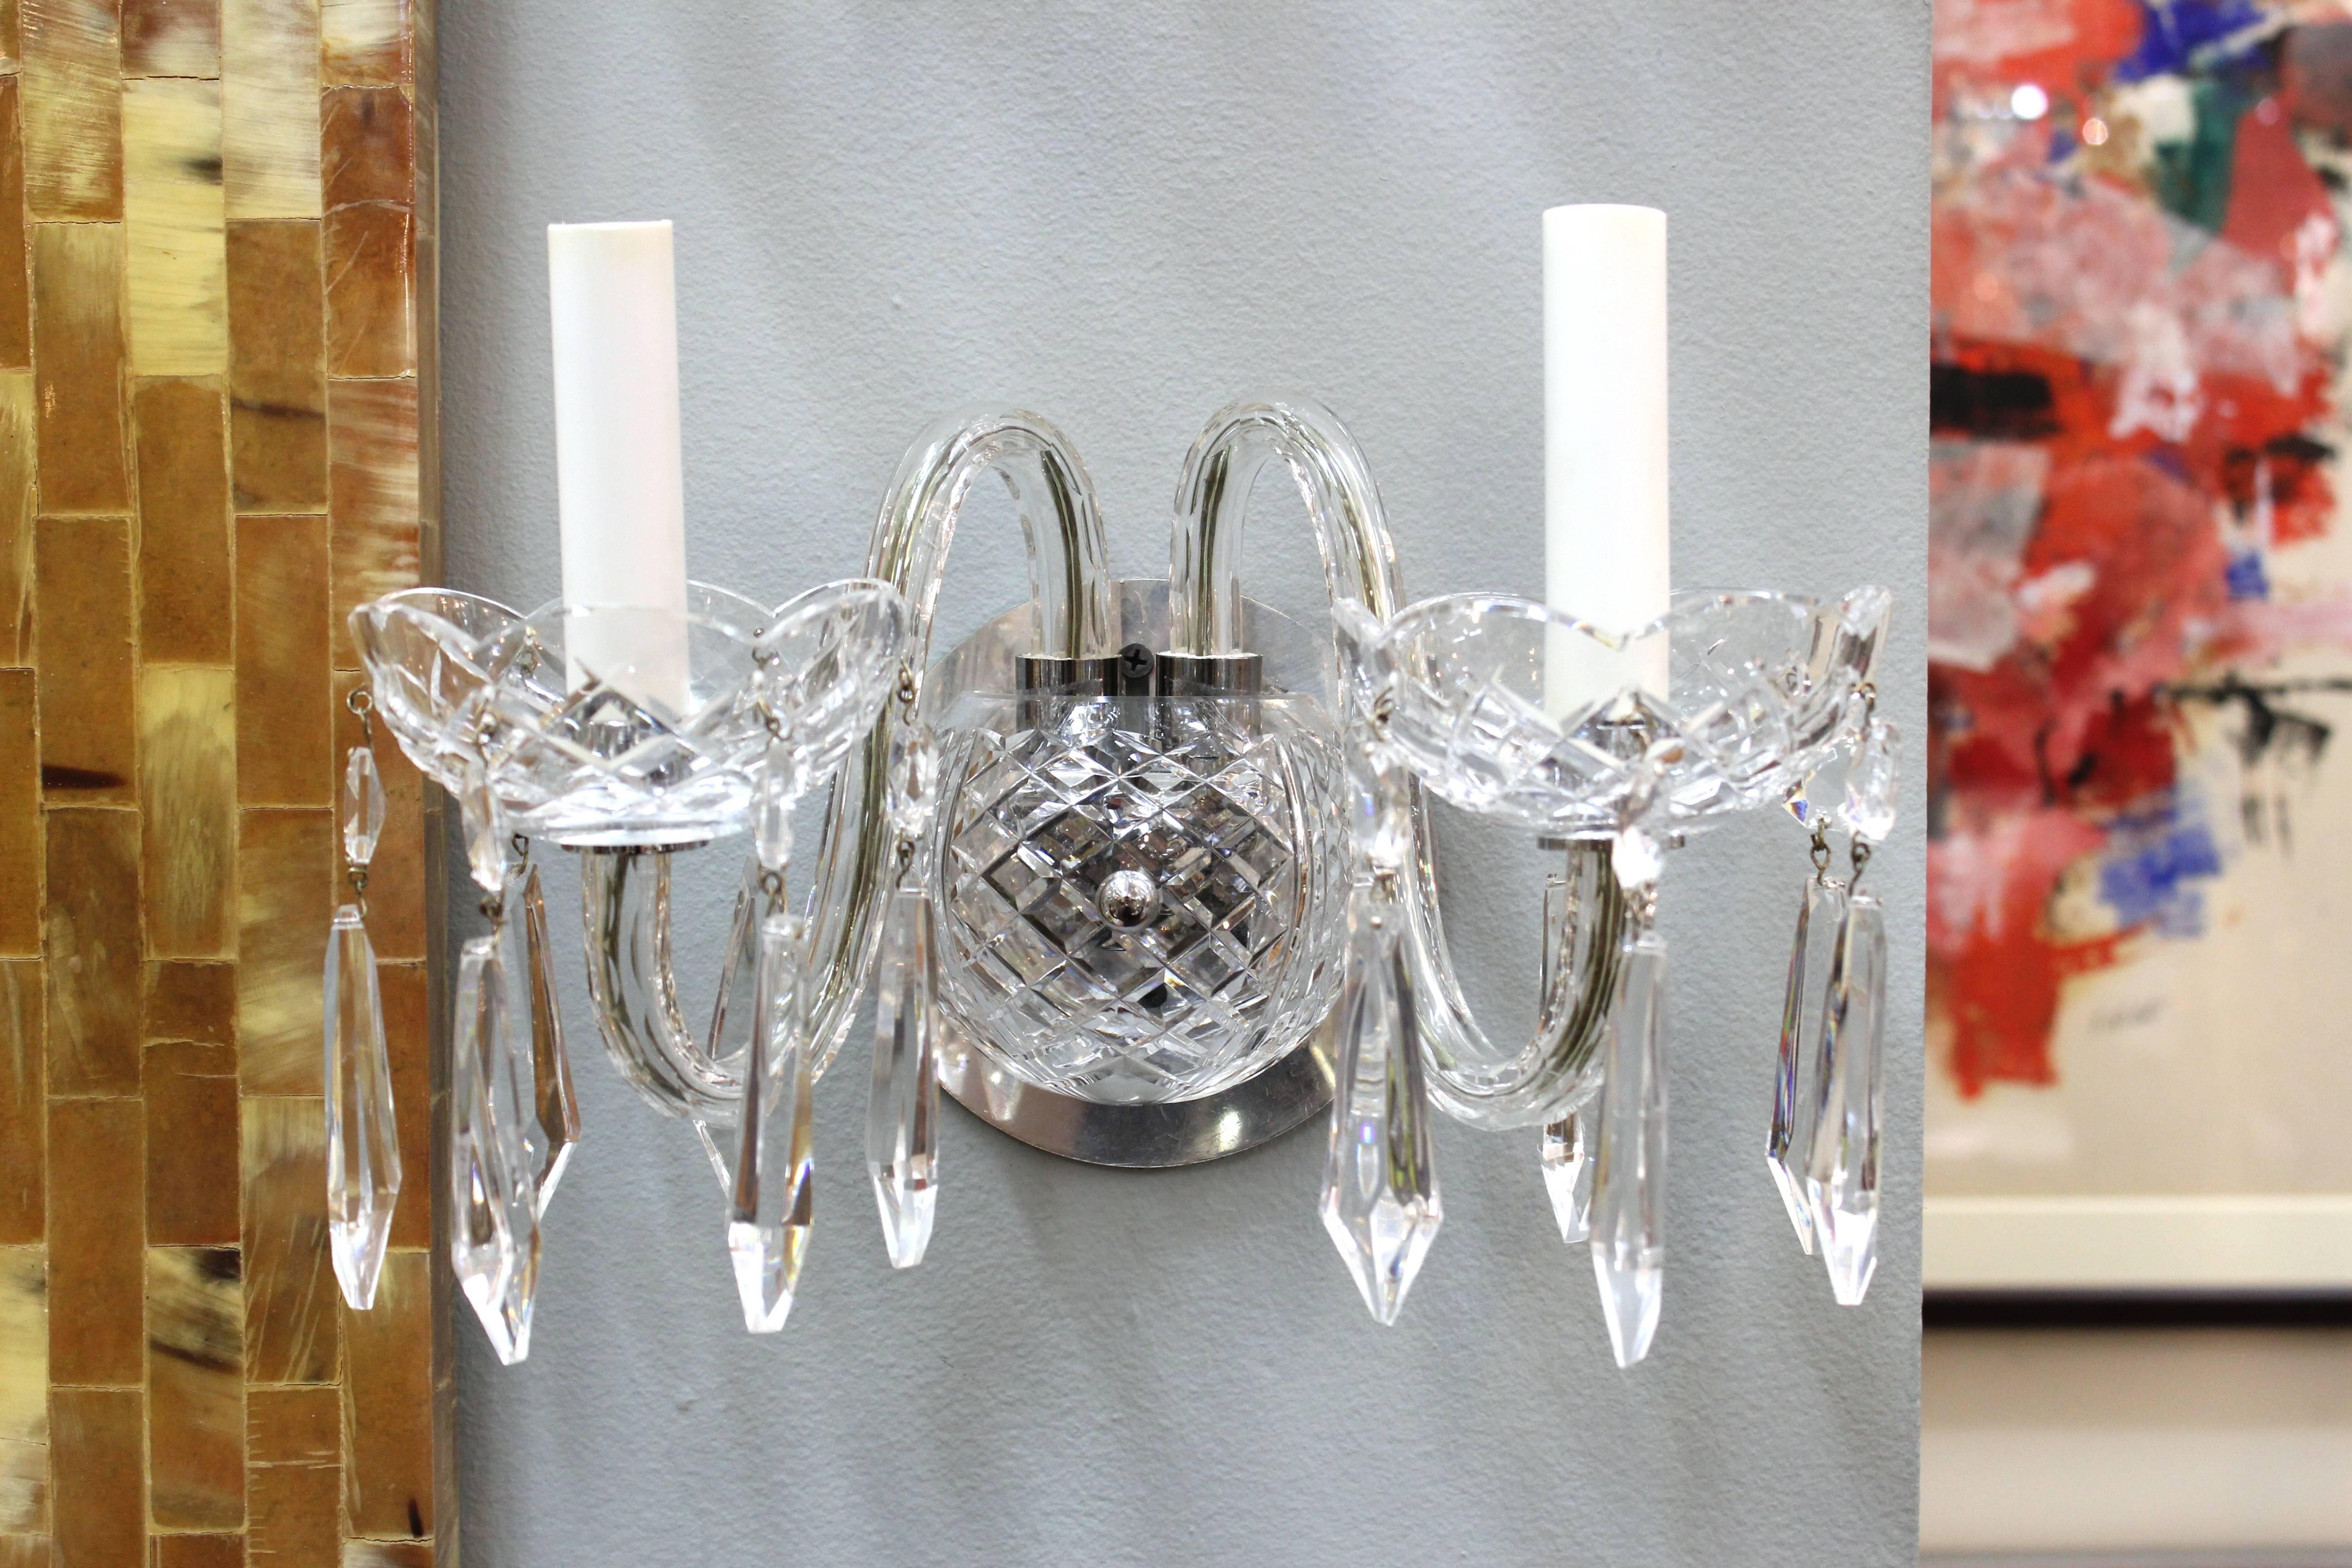 Set of sconces produced in Waterford crystal. Each piece features two carved arms attached to a cut crystal center. The scalloped faux candleholders are hung with faceted crystal drops. Minor wear consistent with use. In good condition.